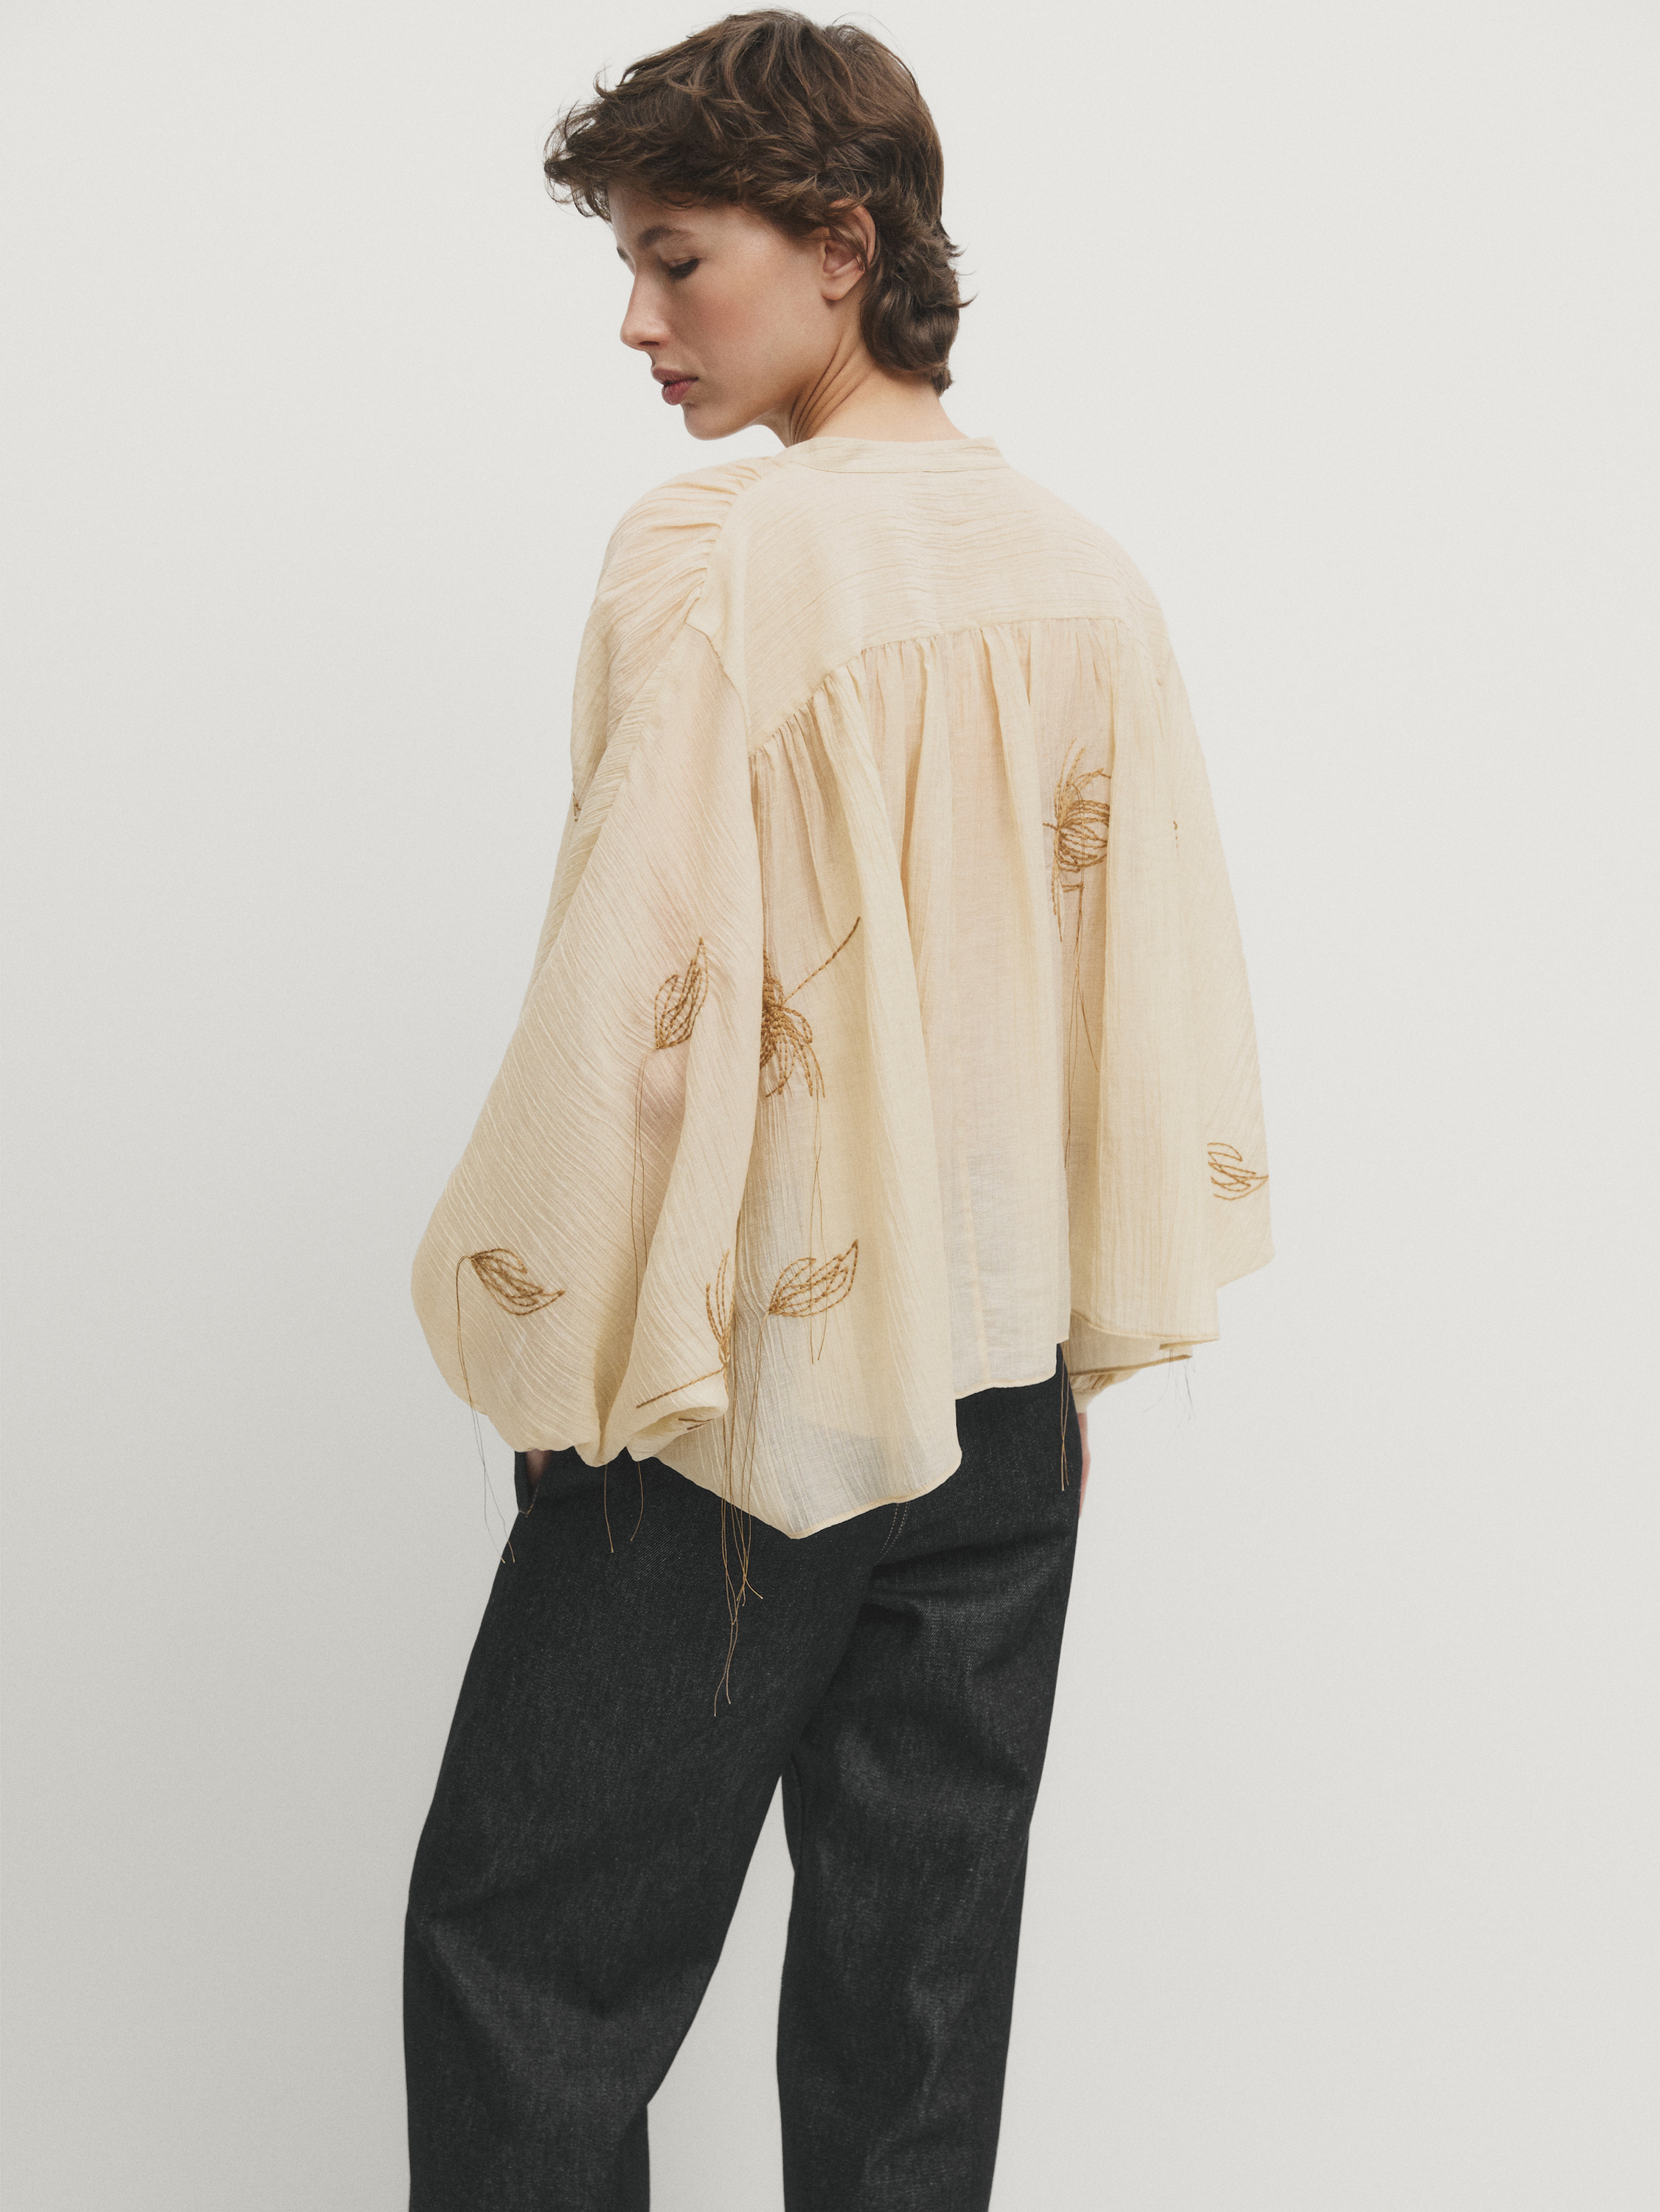 Cape shirt with embroidered detail